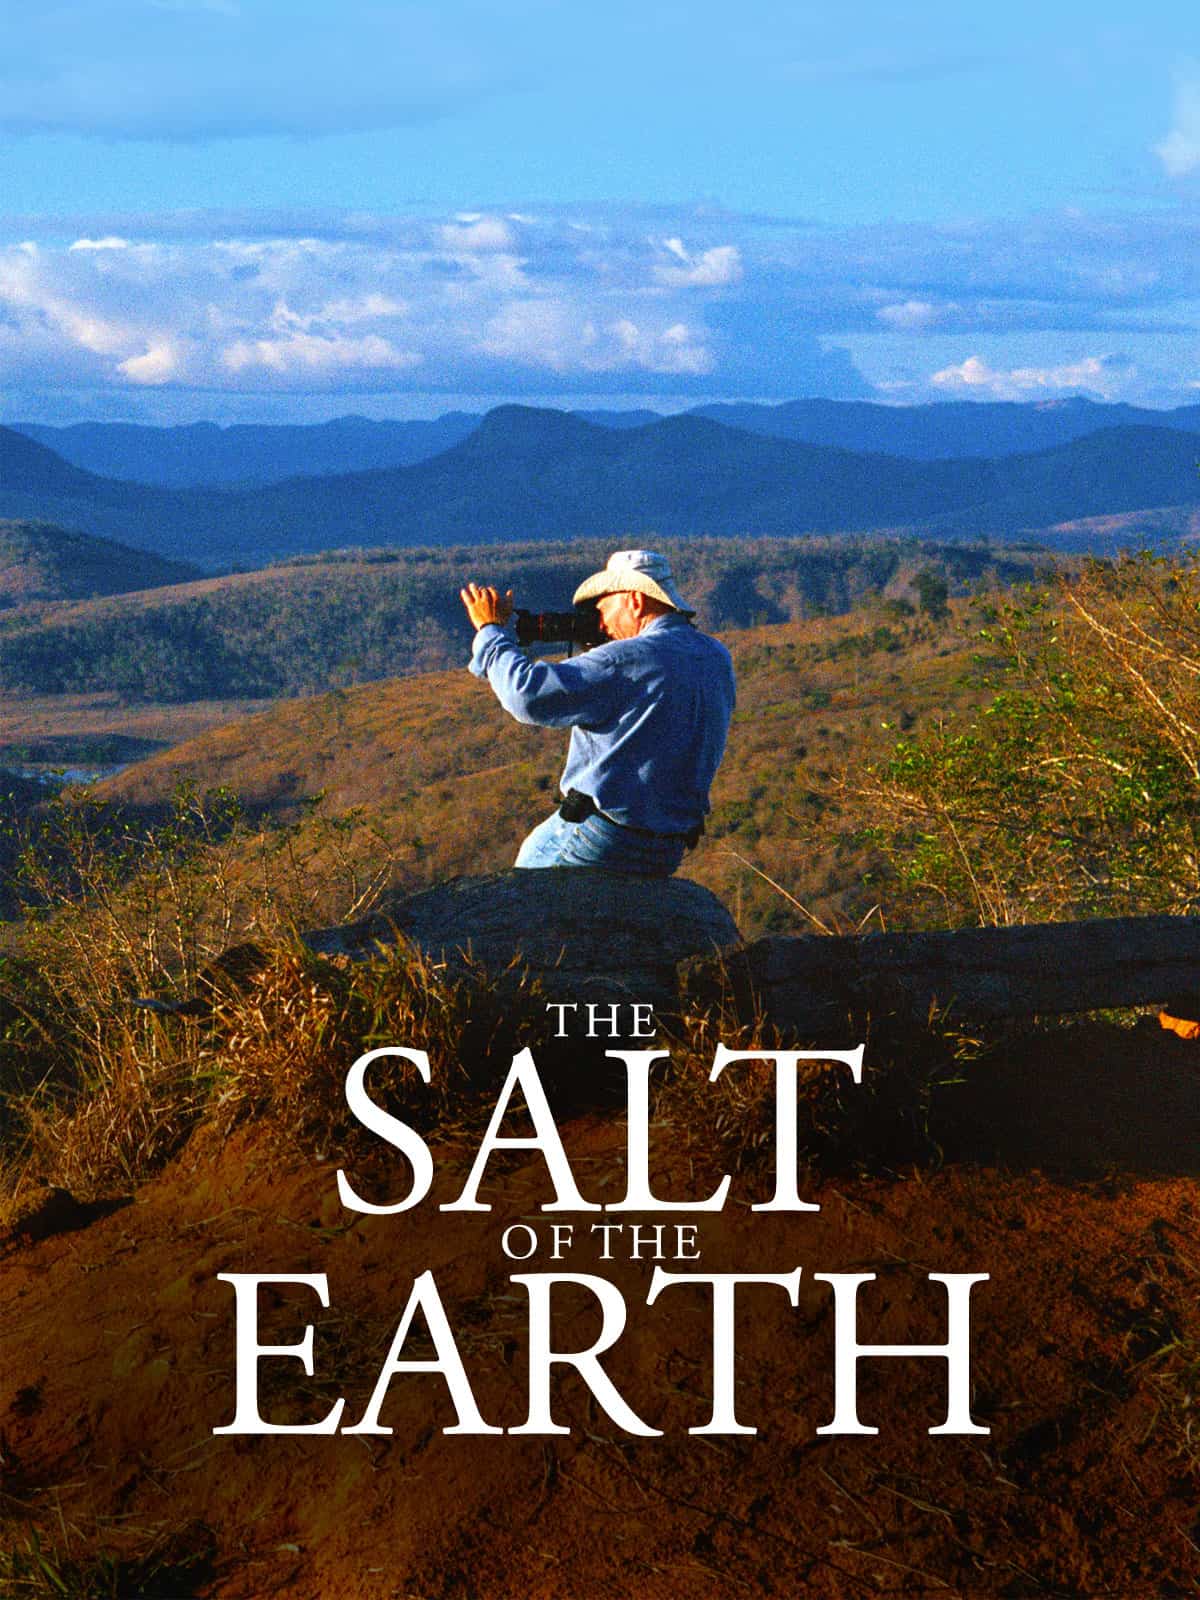 Film in 't Lam - The salt of the earth